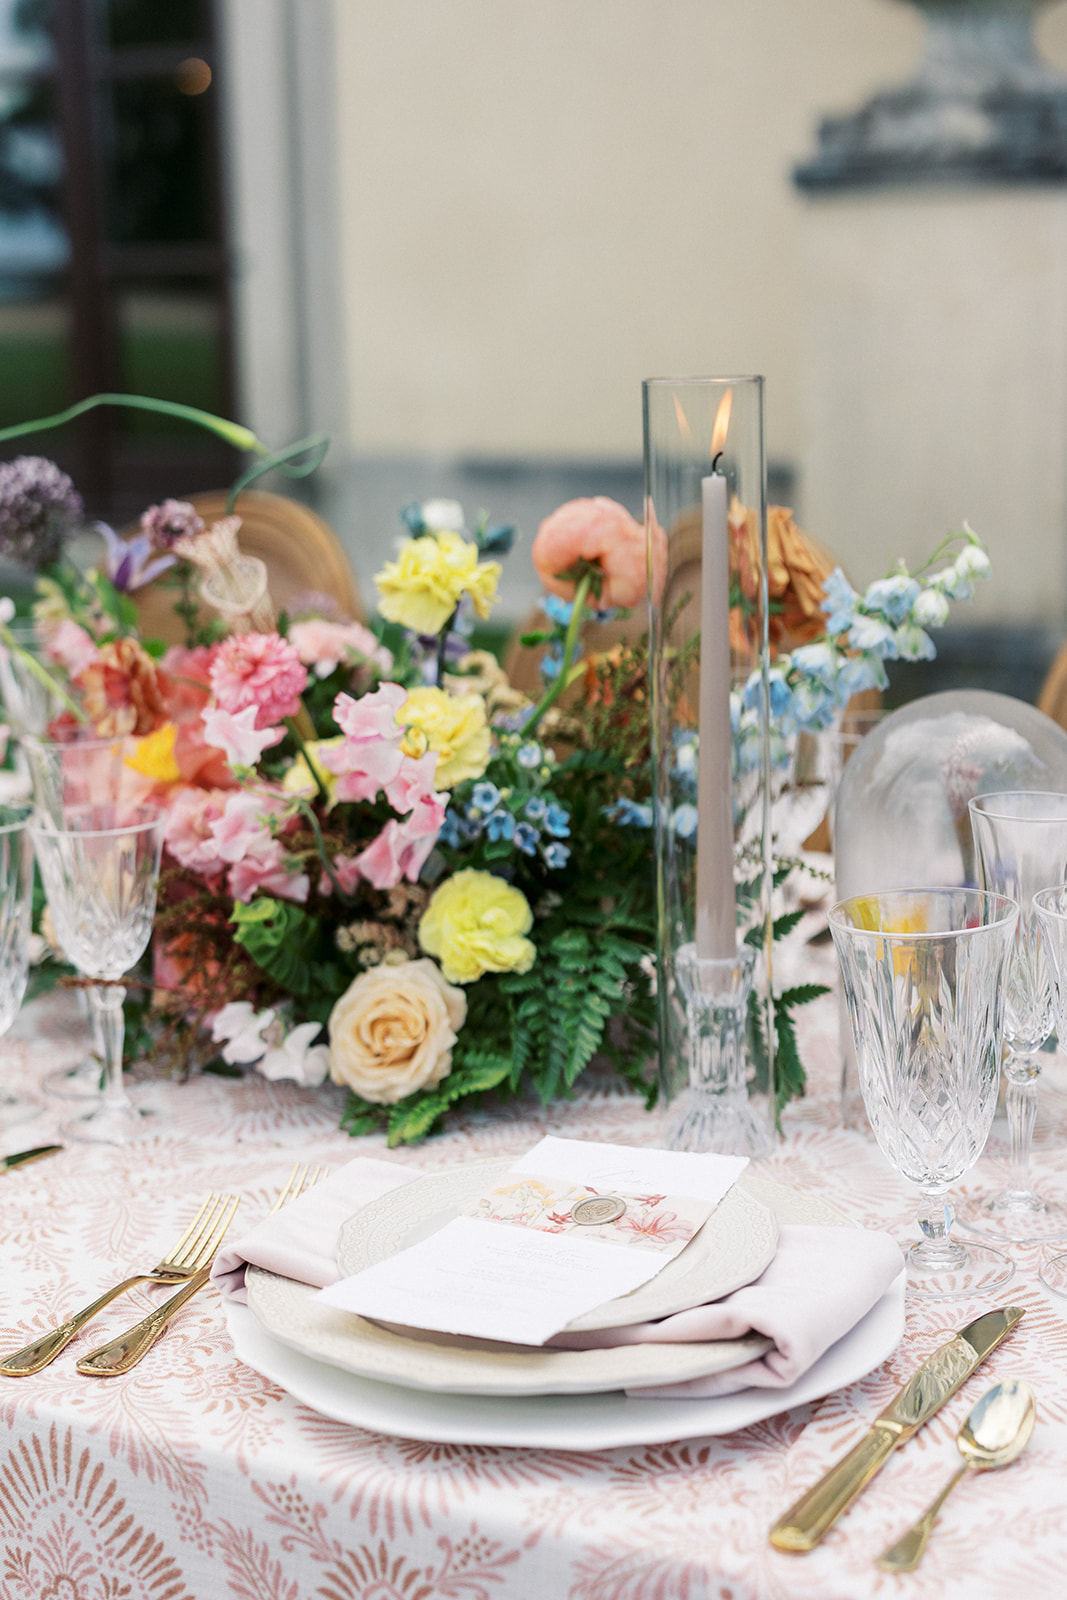 Details of a wedding reception table set up outside